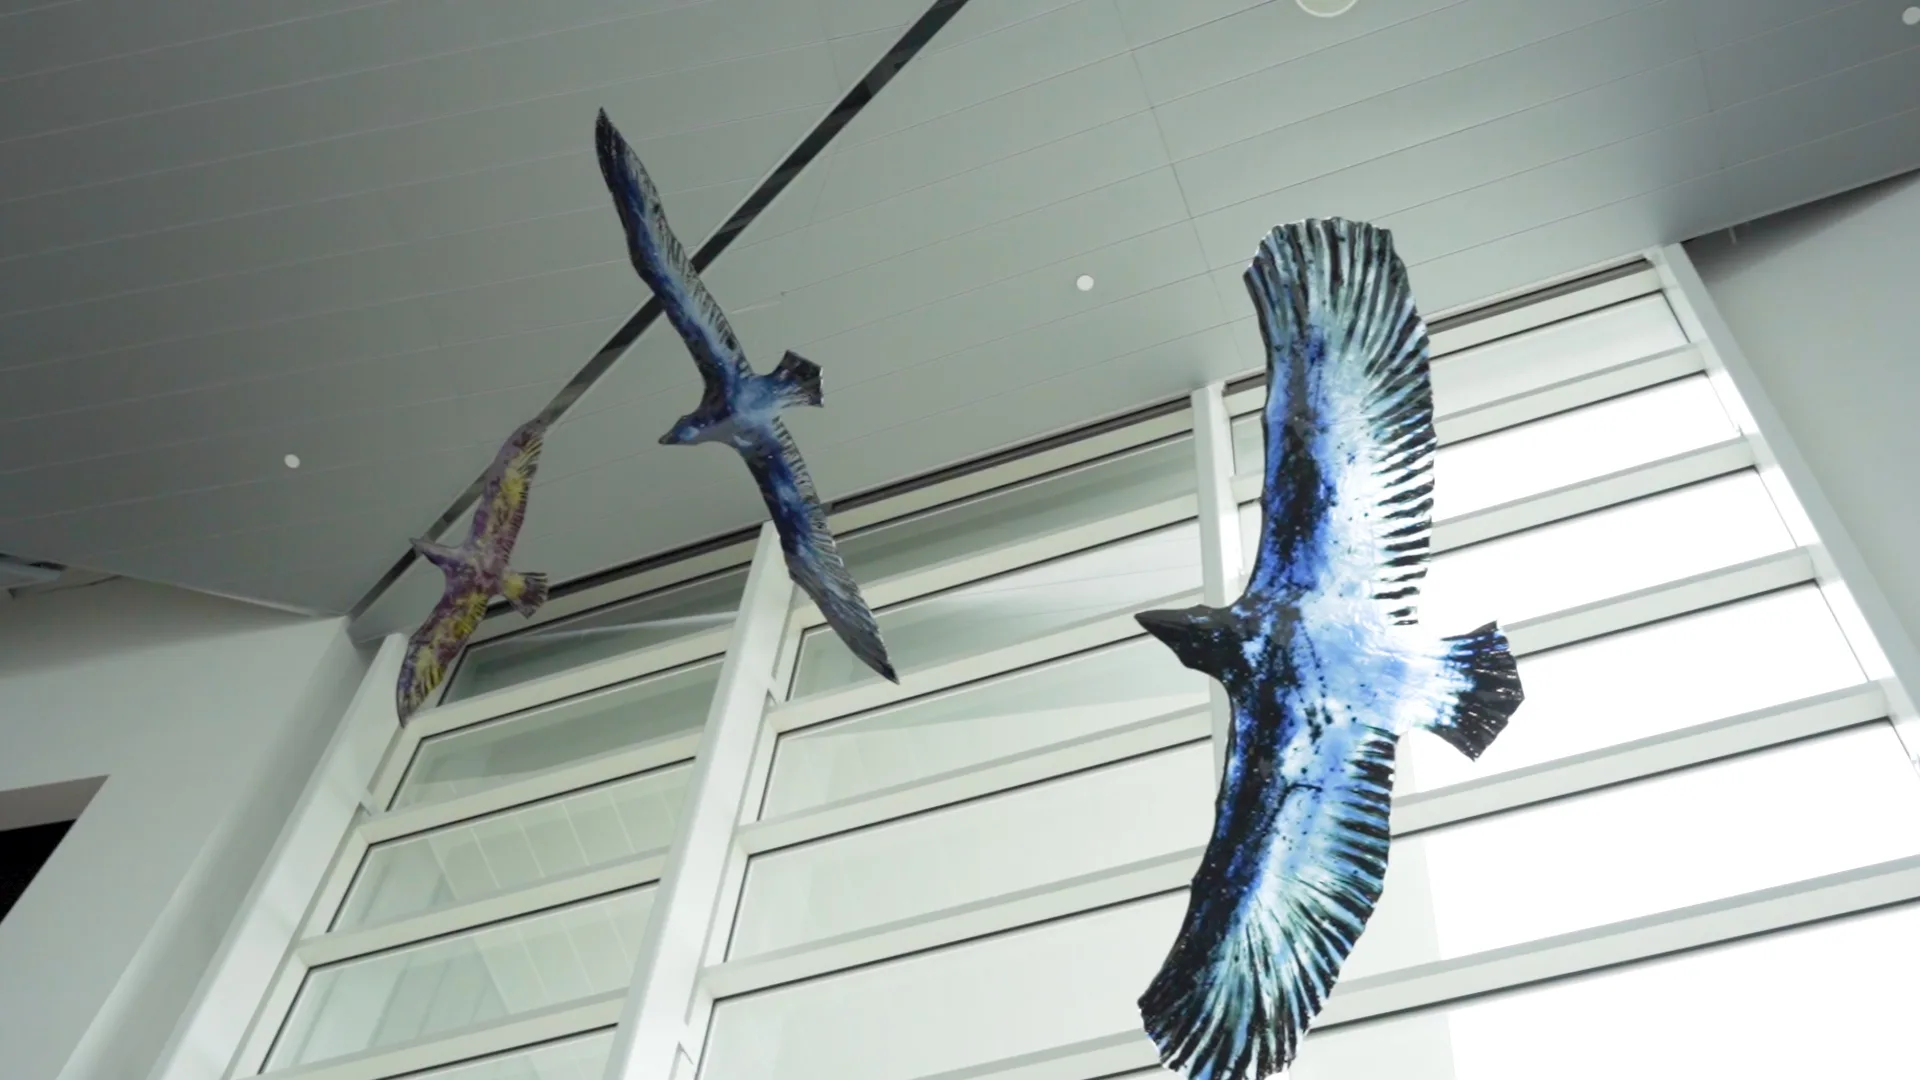 Two glass birds, both blue, hand in the National Nordic Museum's main entrance. An art piece—Tróndur Patursson's Migration.